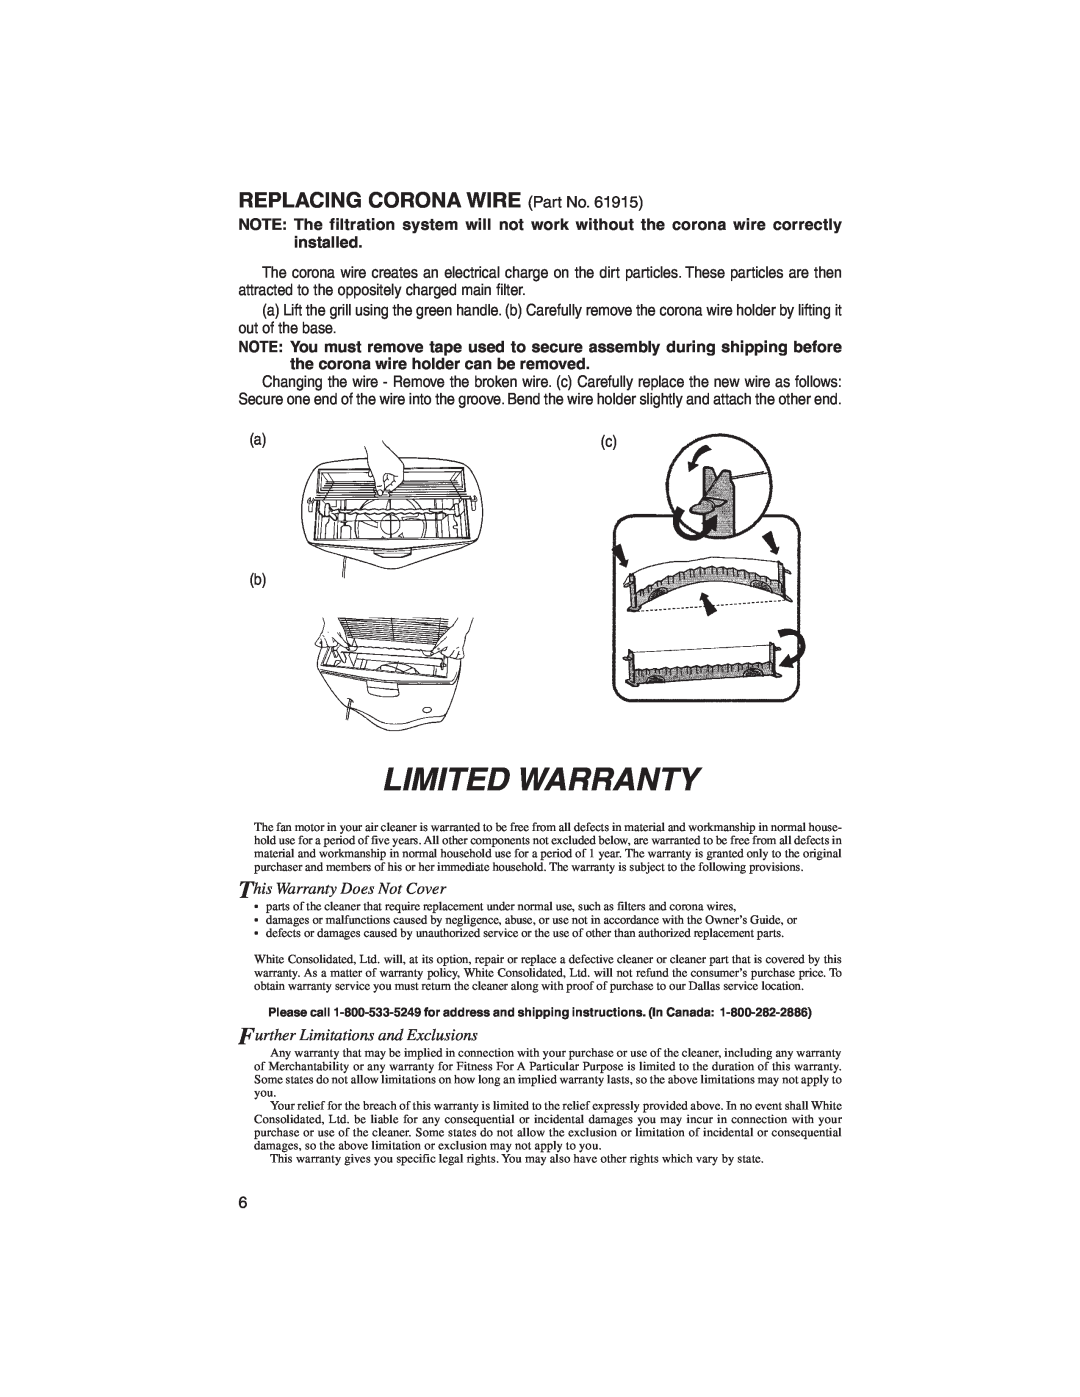 Electrolux Z7040 operating instructions REPLACING CORONA WIRE Part No, Limited Warranty, This Warranty Does Not Cover 